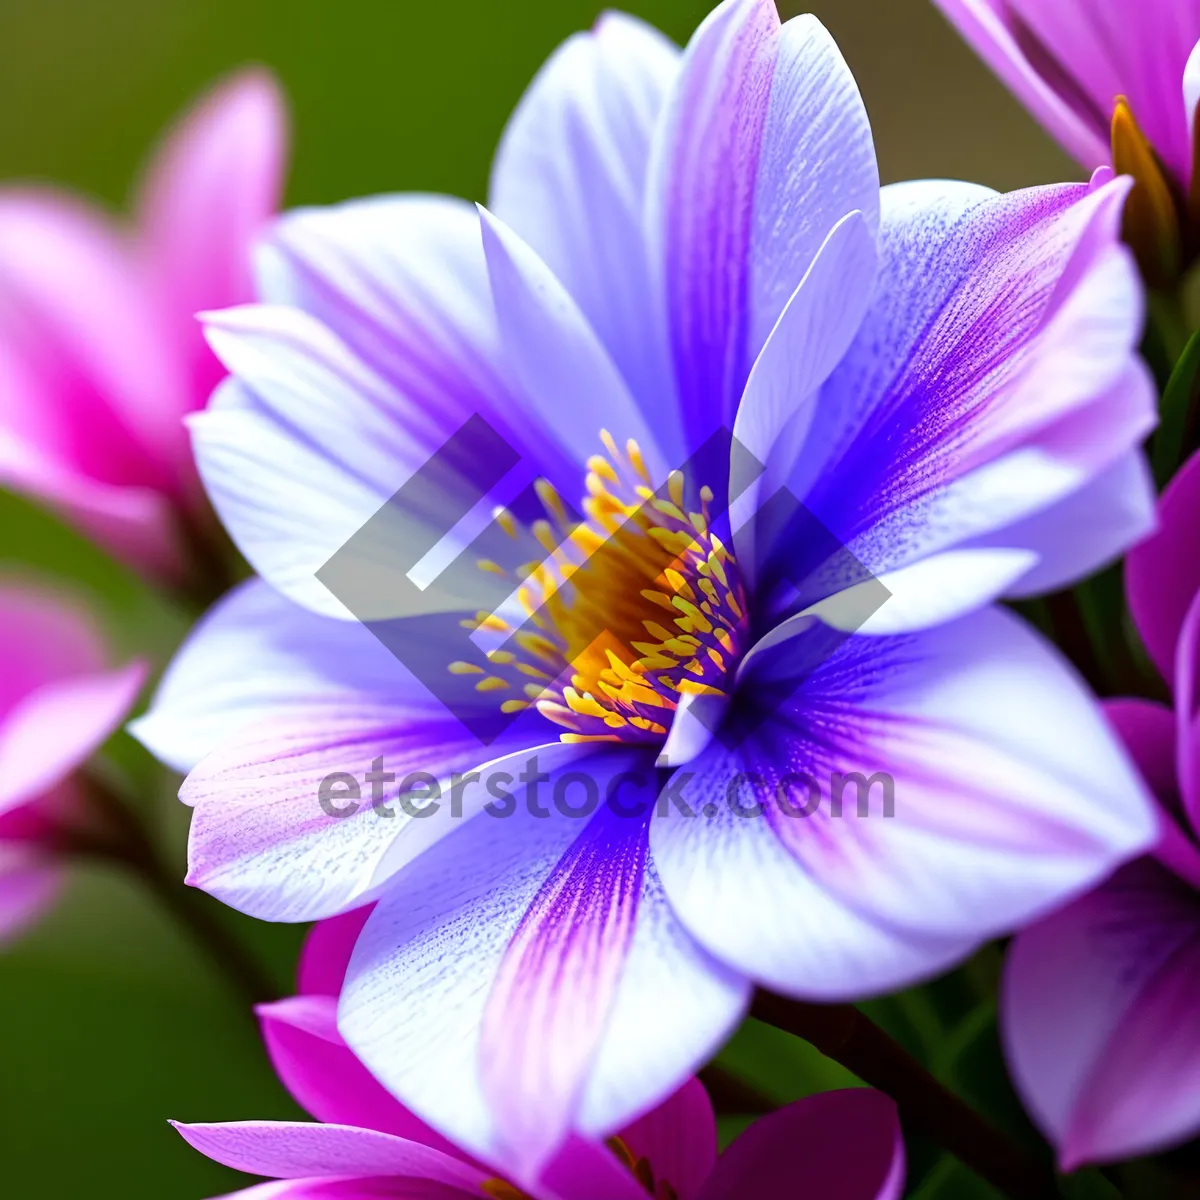 Picture of Bright Blooming Crocus Flowers in Colorful Garden